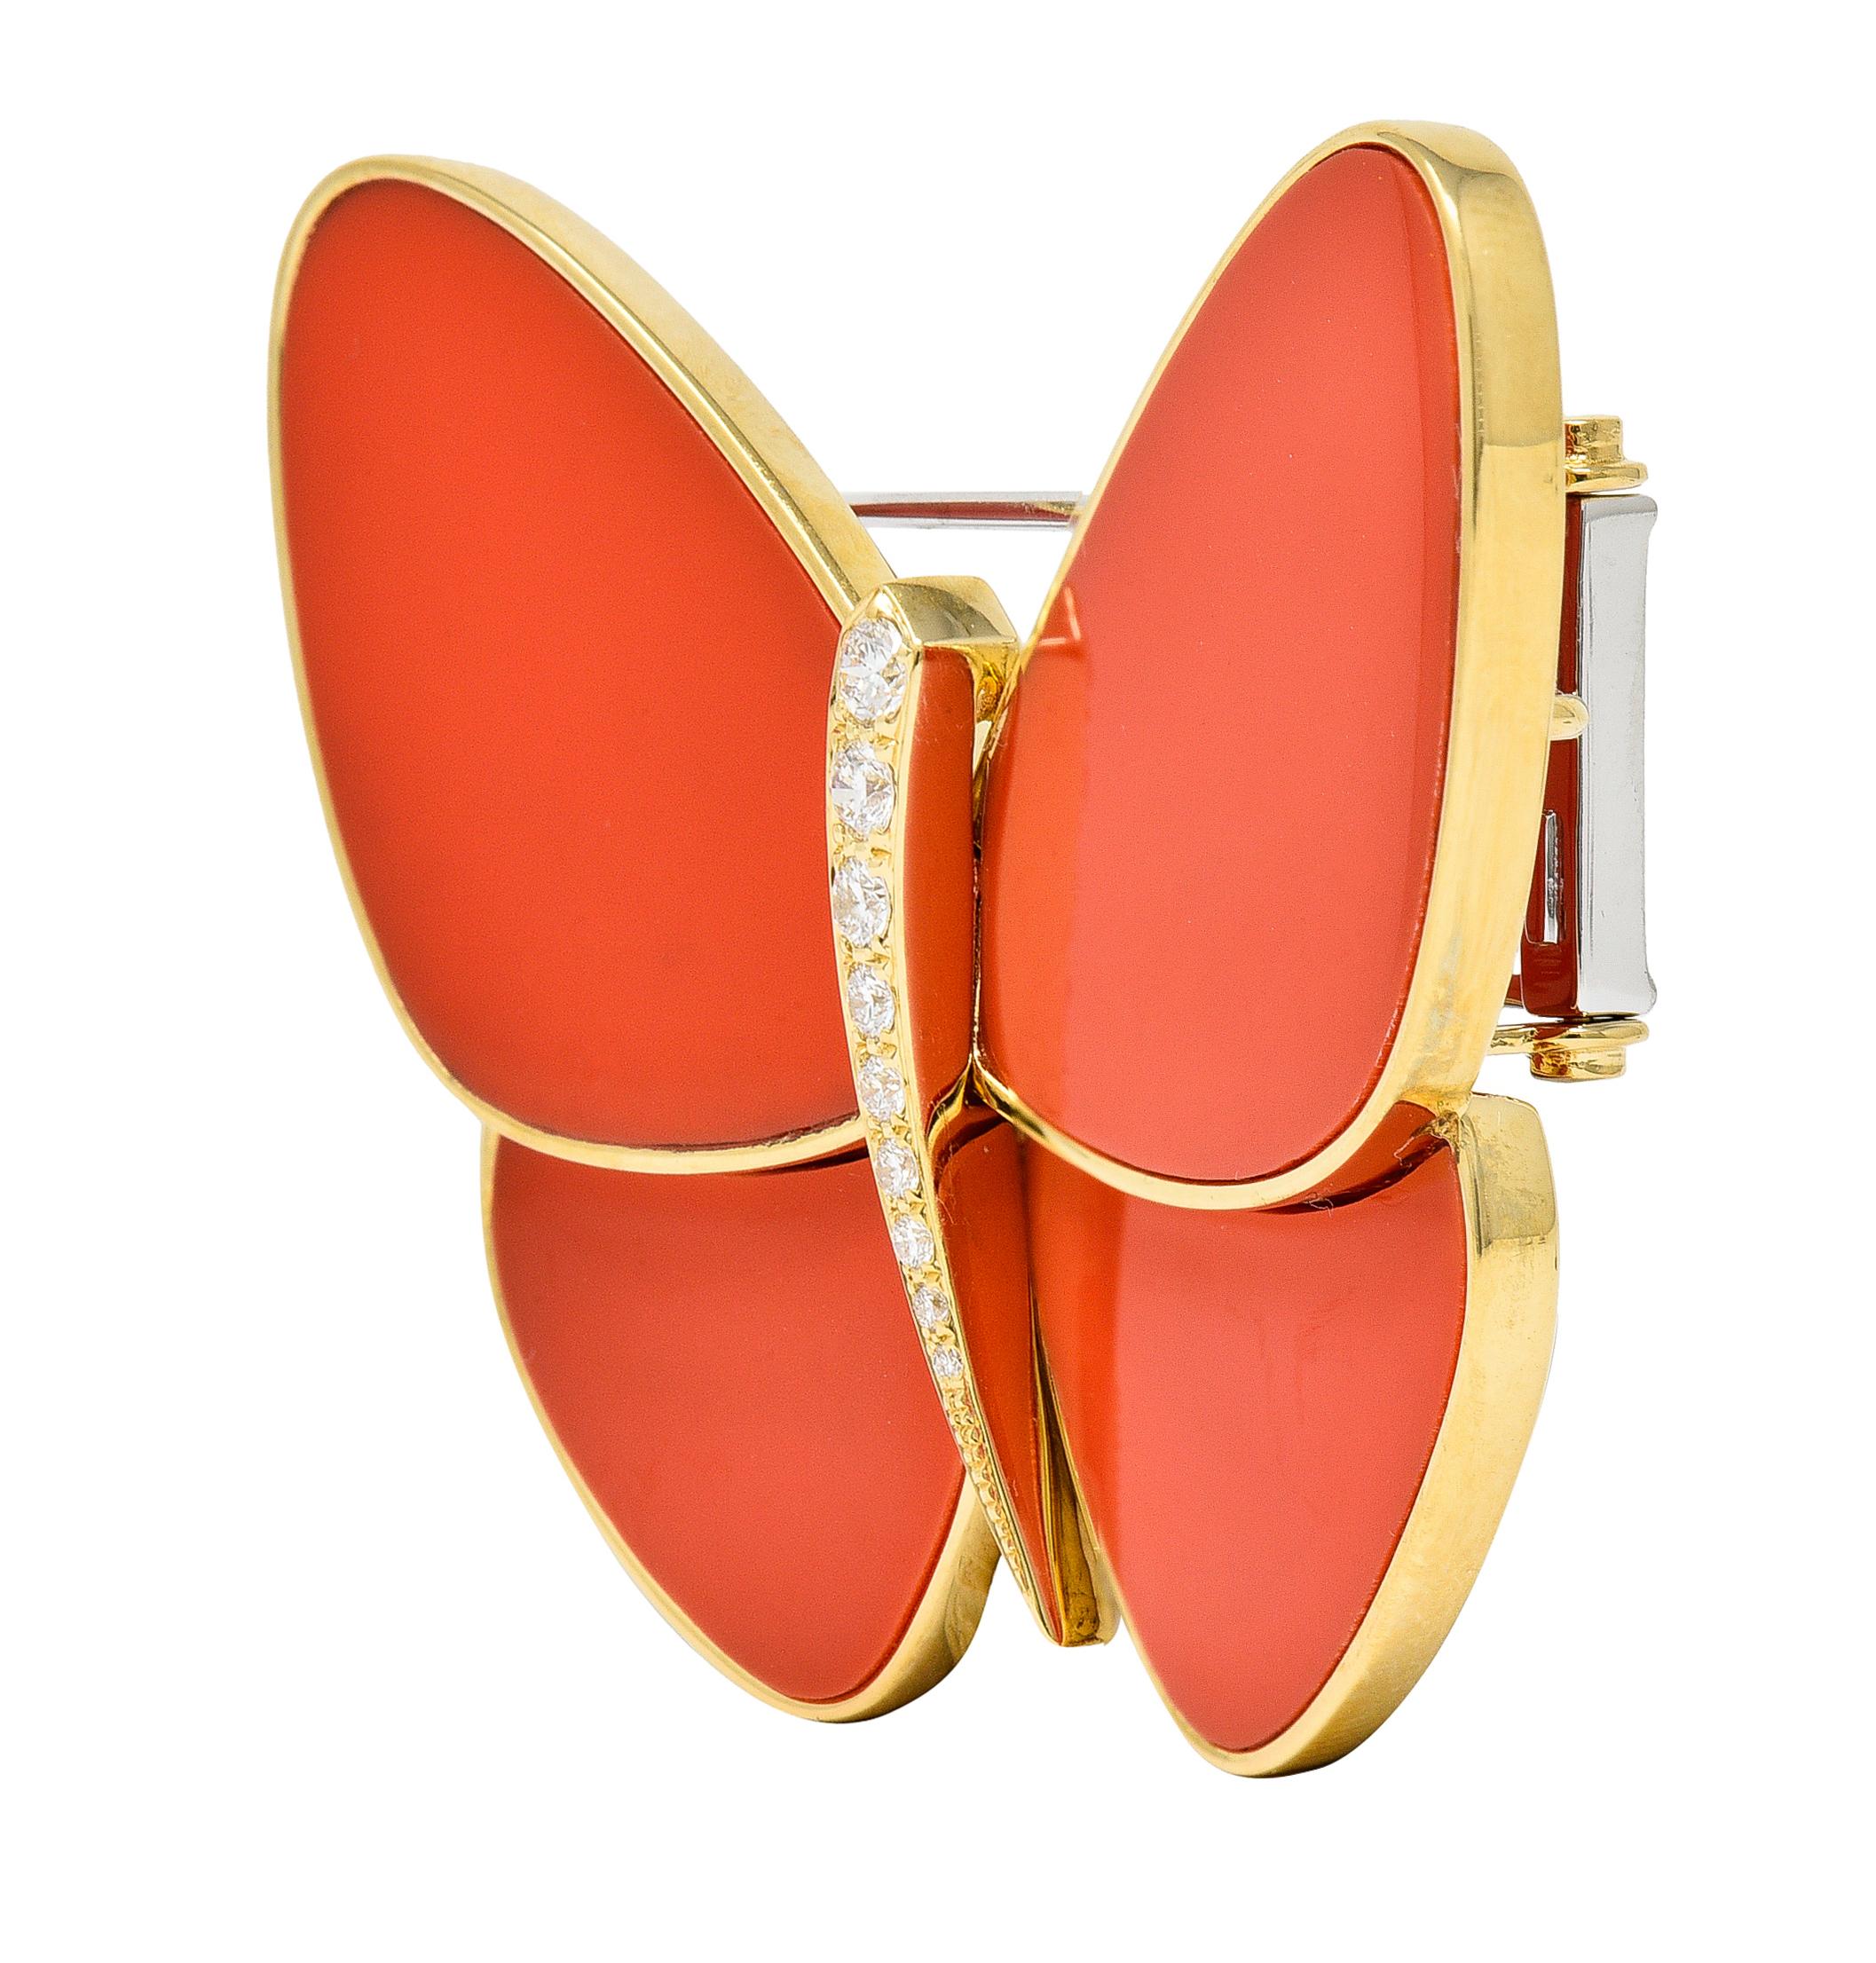 Designed a stylized butterfly featuring inlaid coral wings 
Opaque medium reddish-orange in color
Centering round brilliant cut diamonds 
Bead set in body and graduating in size
Weighing approximately 0.38 carat total
G/H color with VS clarity